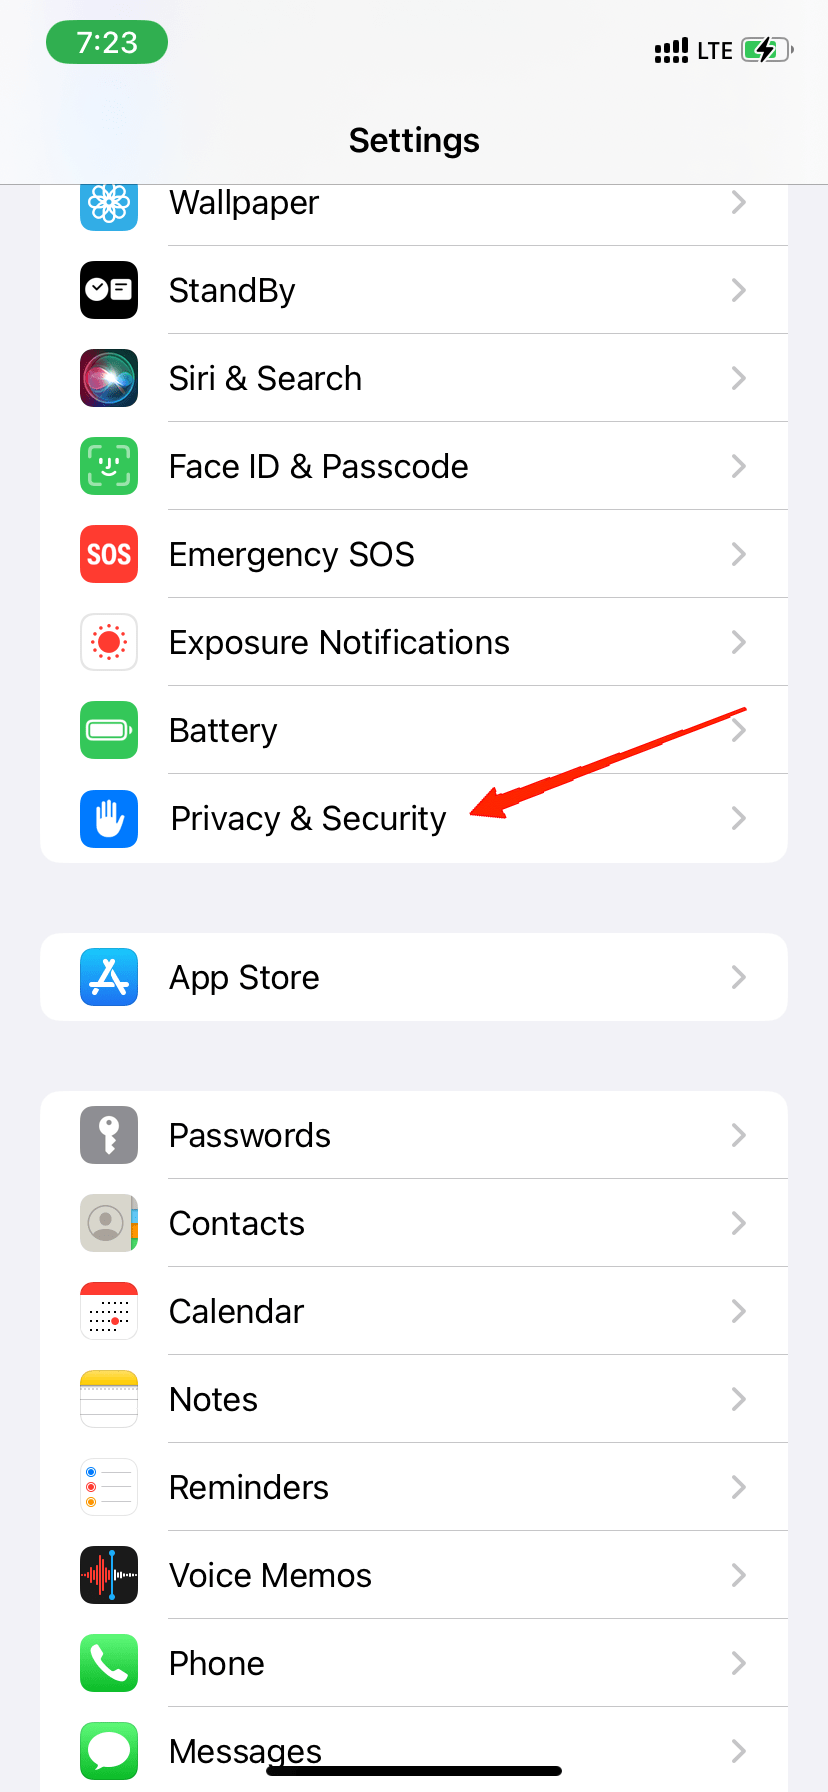 Launch the device Settings and go to Privacy